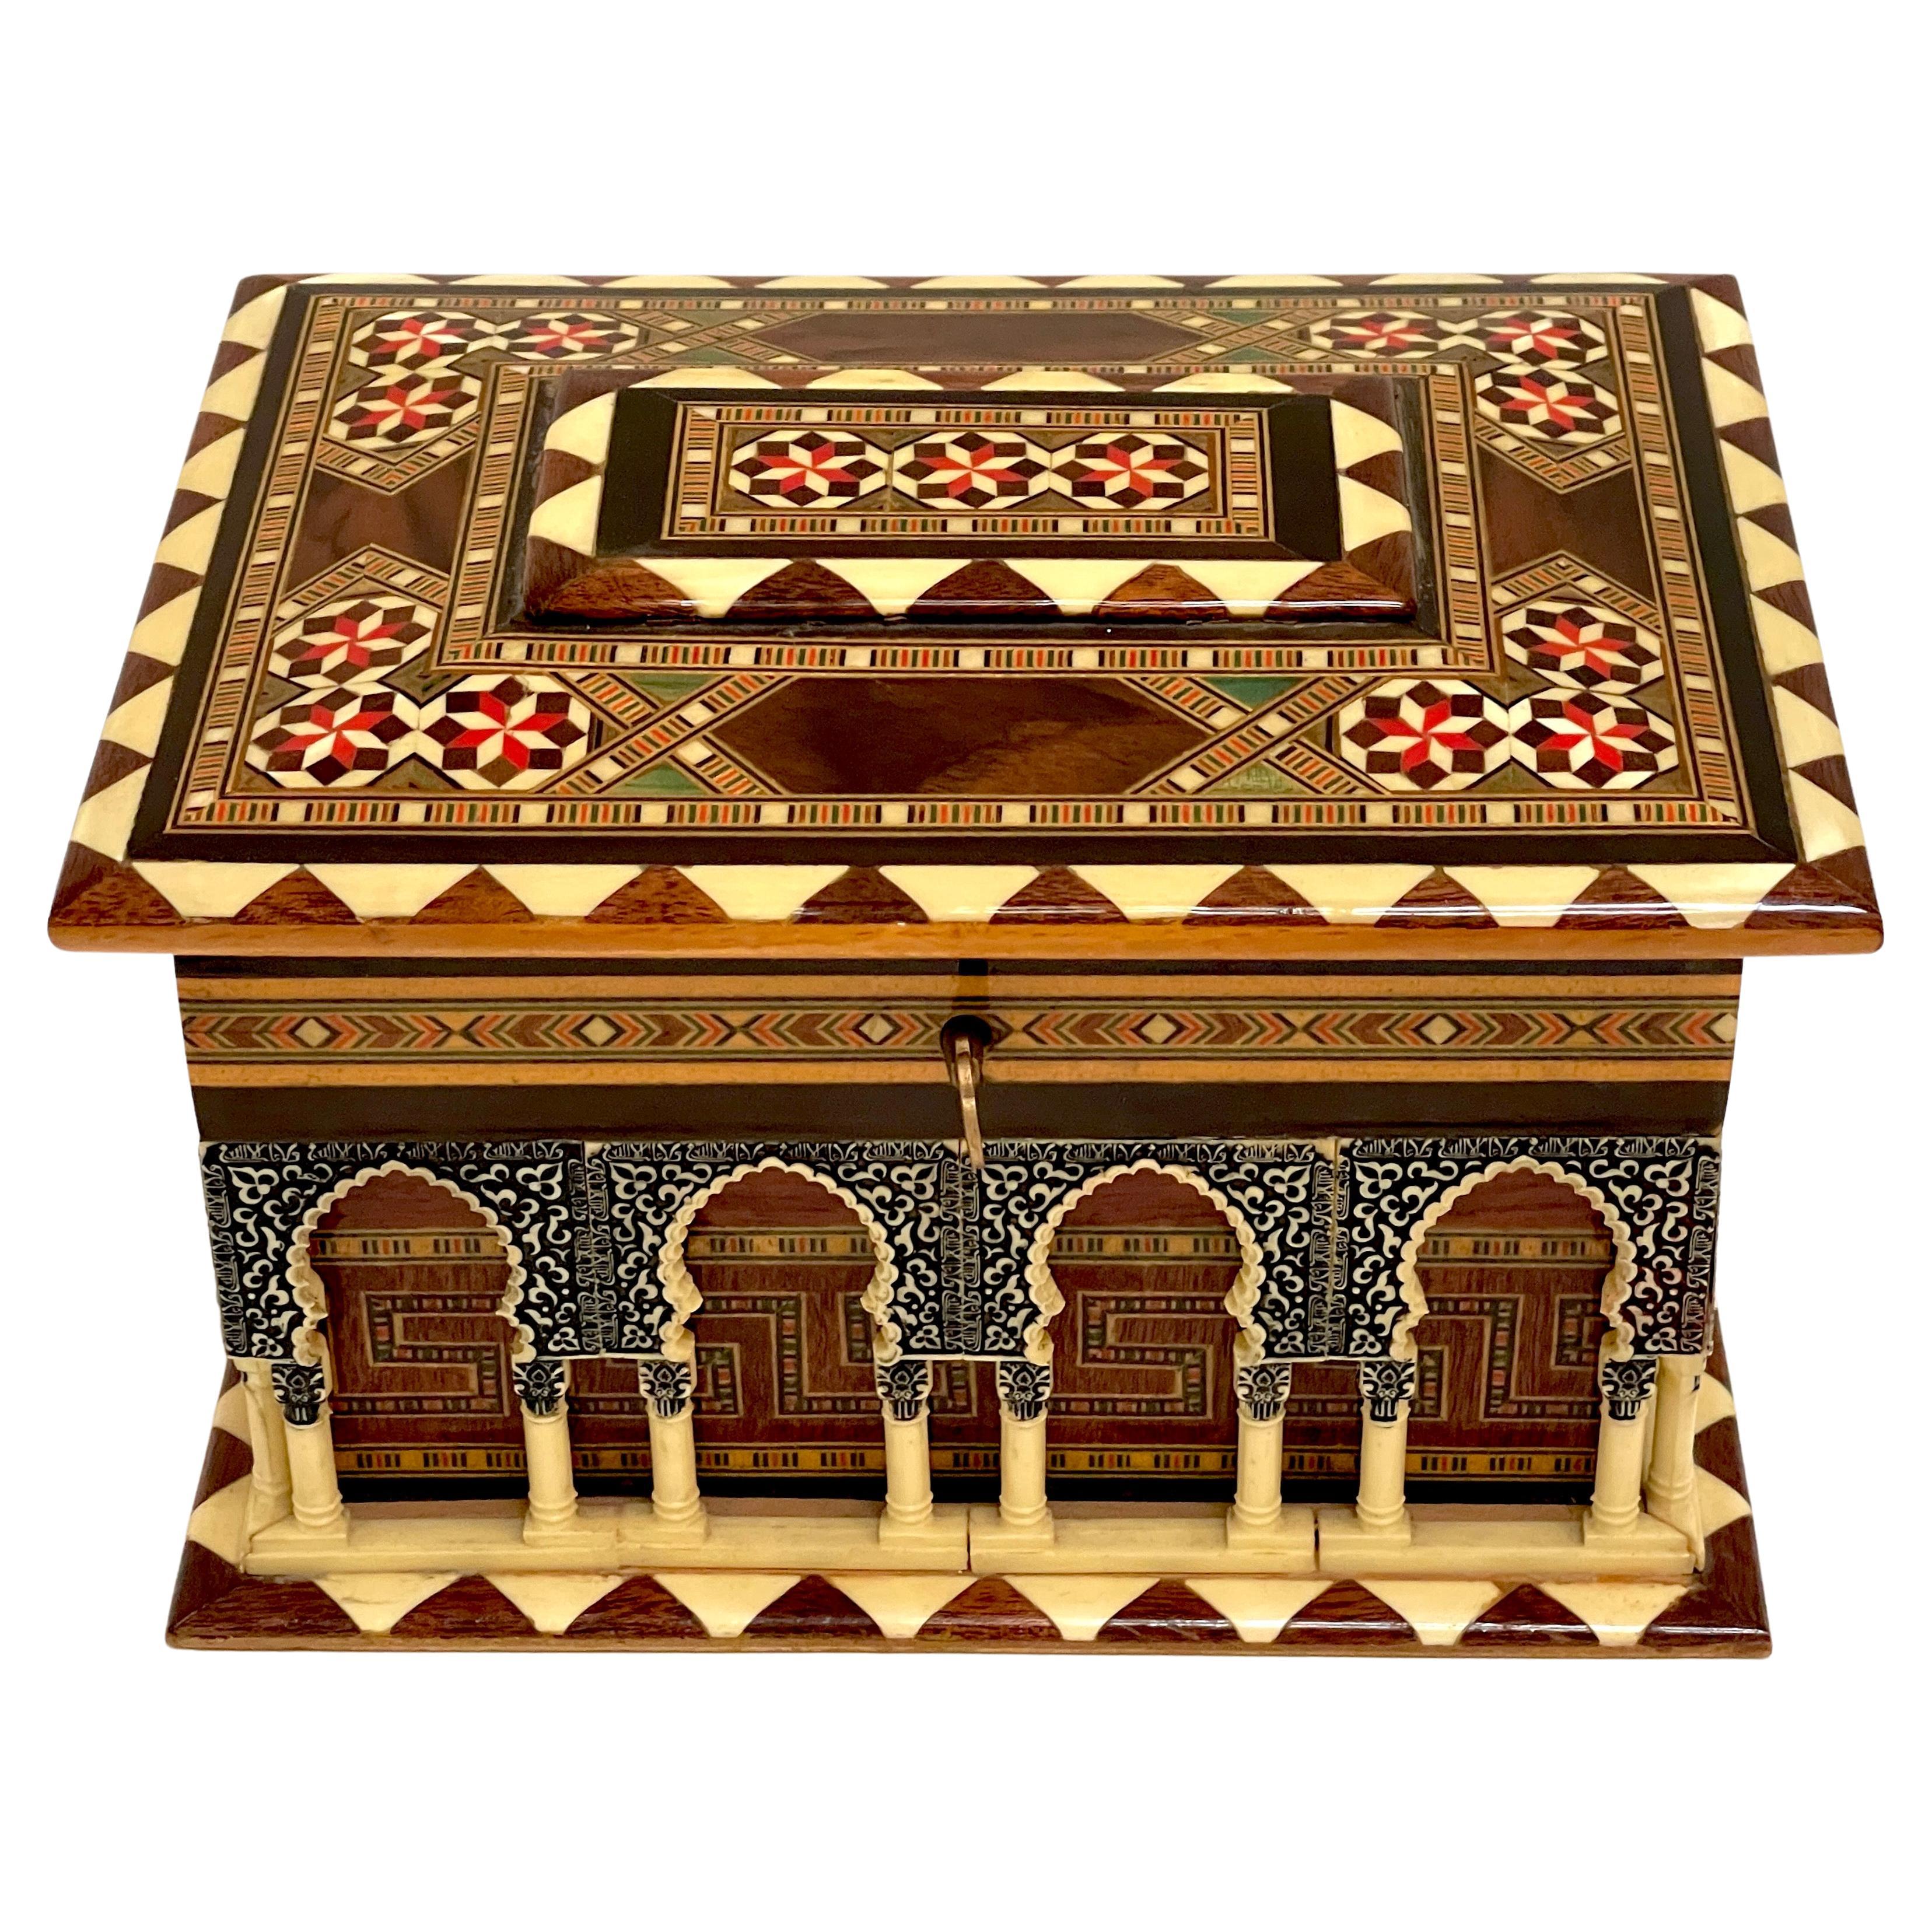 Architectural Model Box of the Alhambra Palace, with Key For Sale